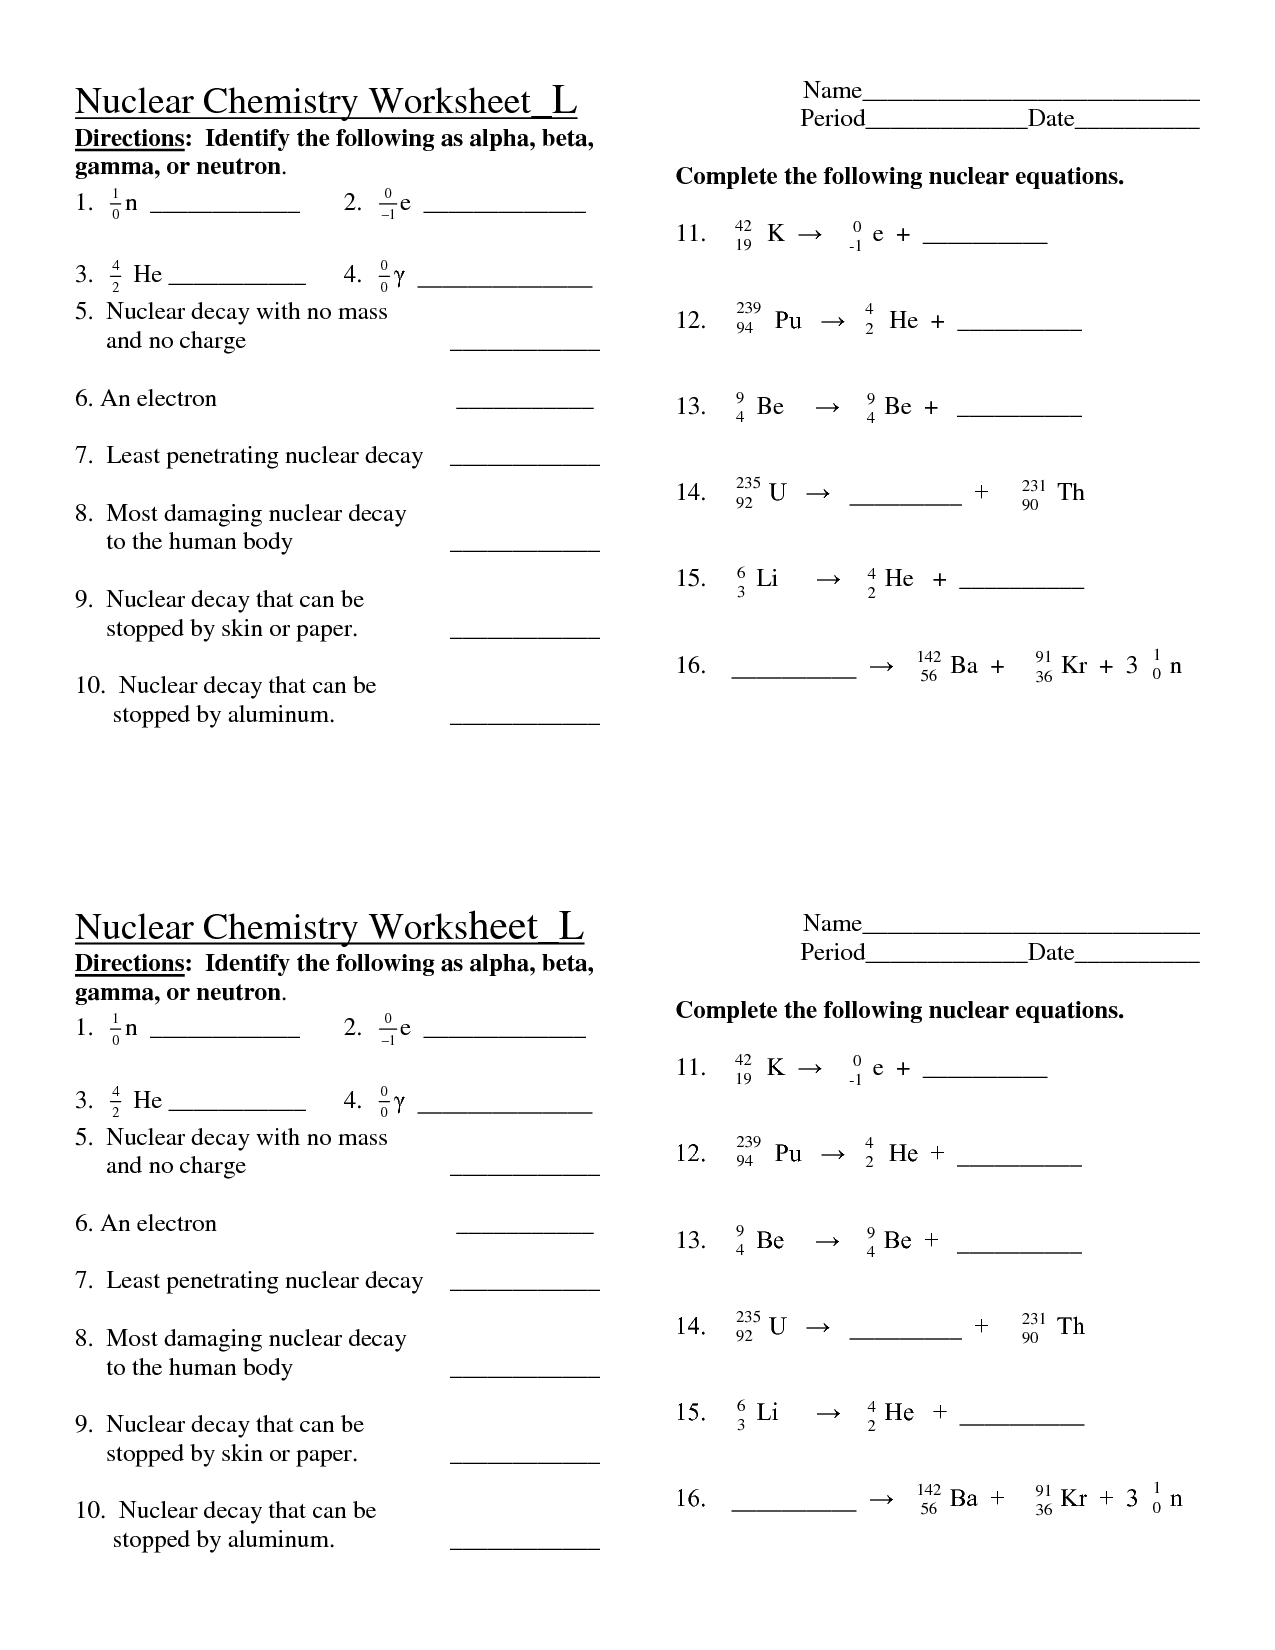 Nuclear Decay Worksheet Answers Chemistry Thekidsworksheet